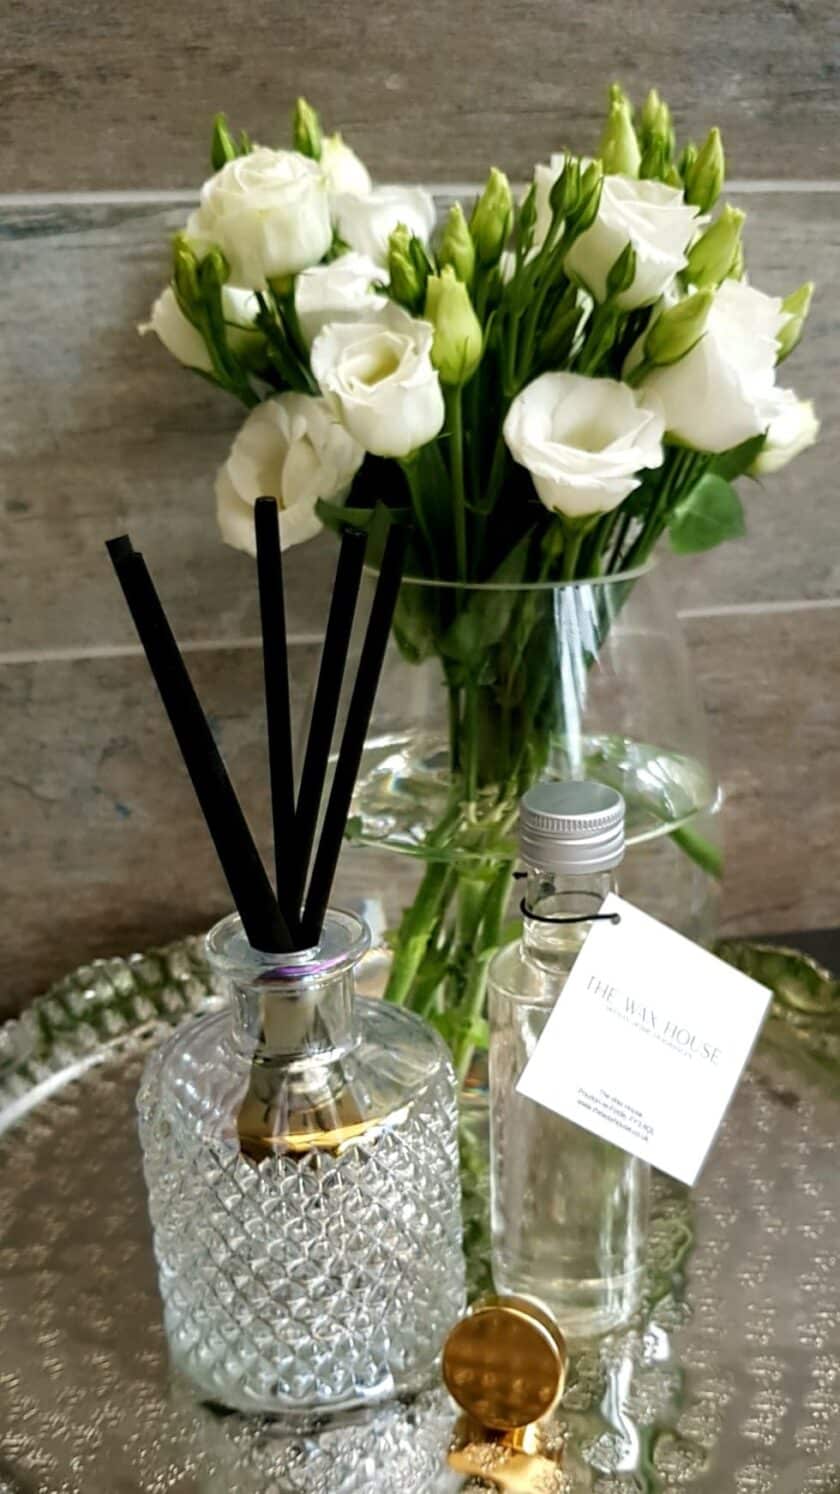 Pearlescent Vintage Inspired Reed Diffuser